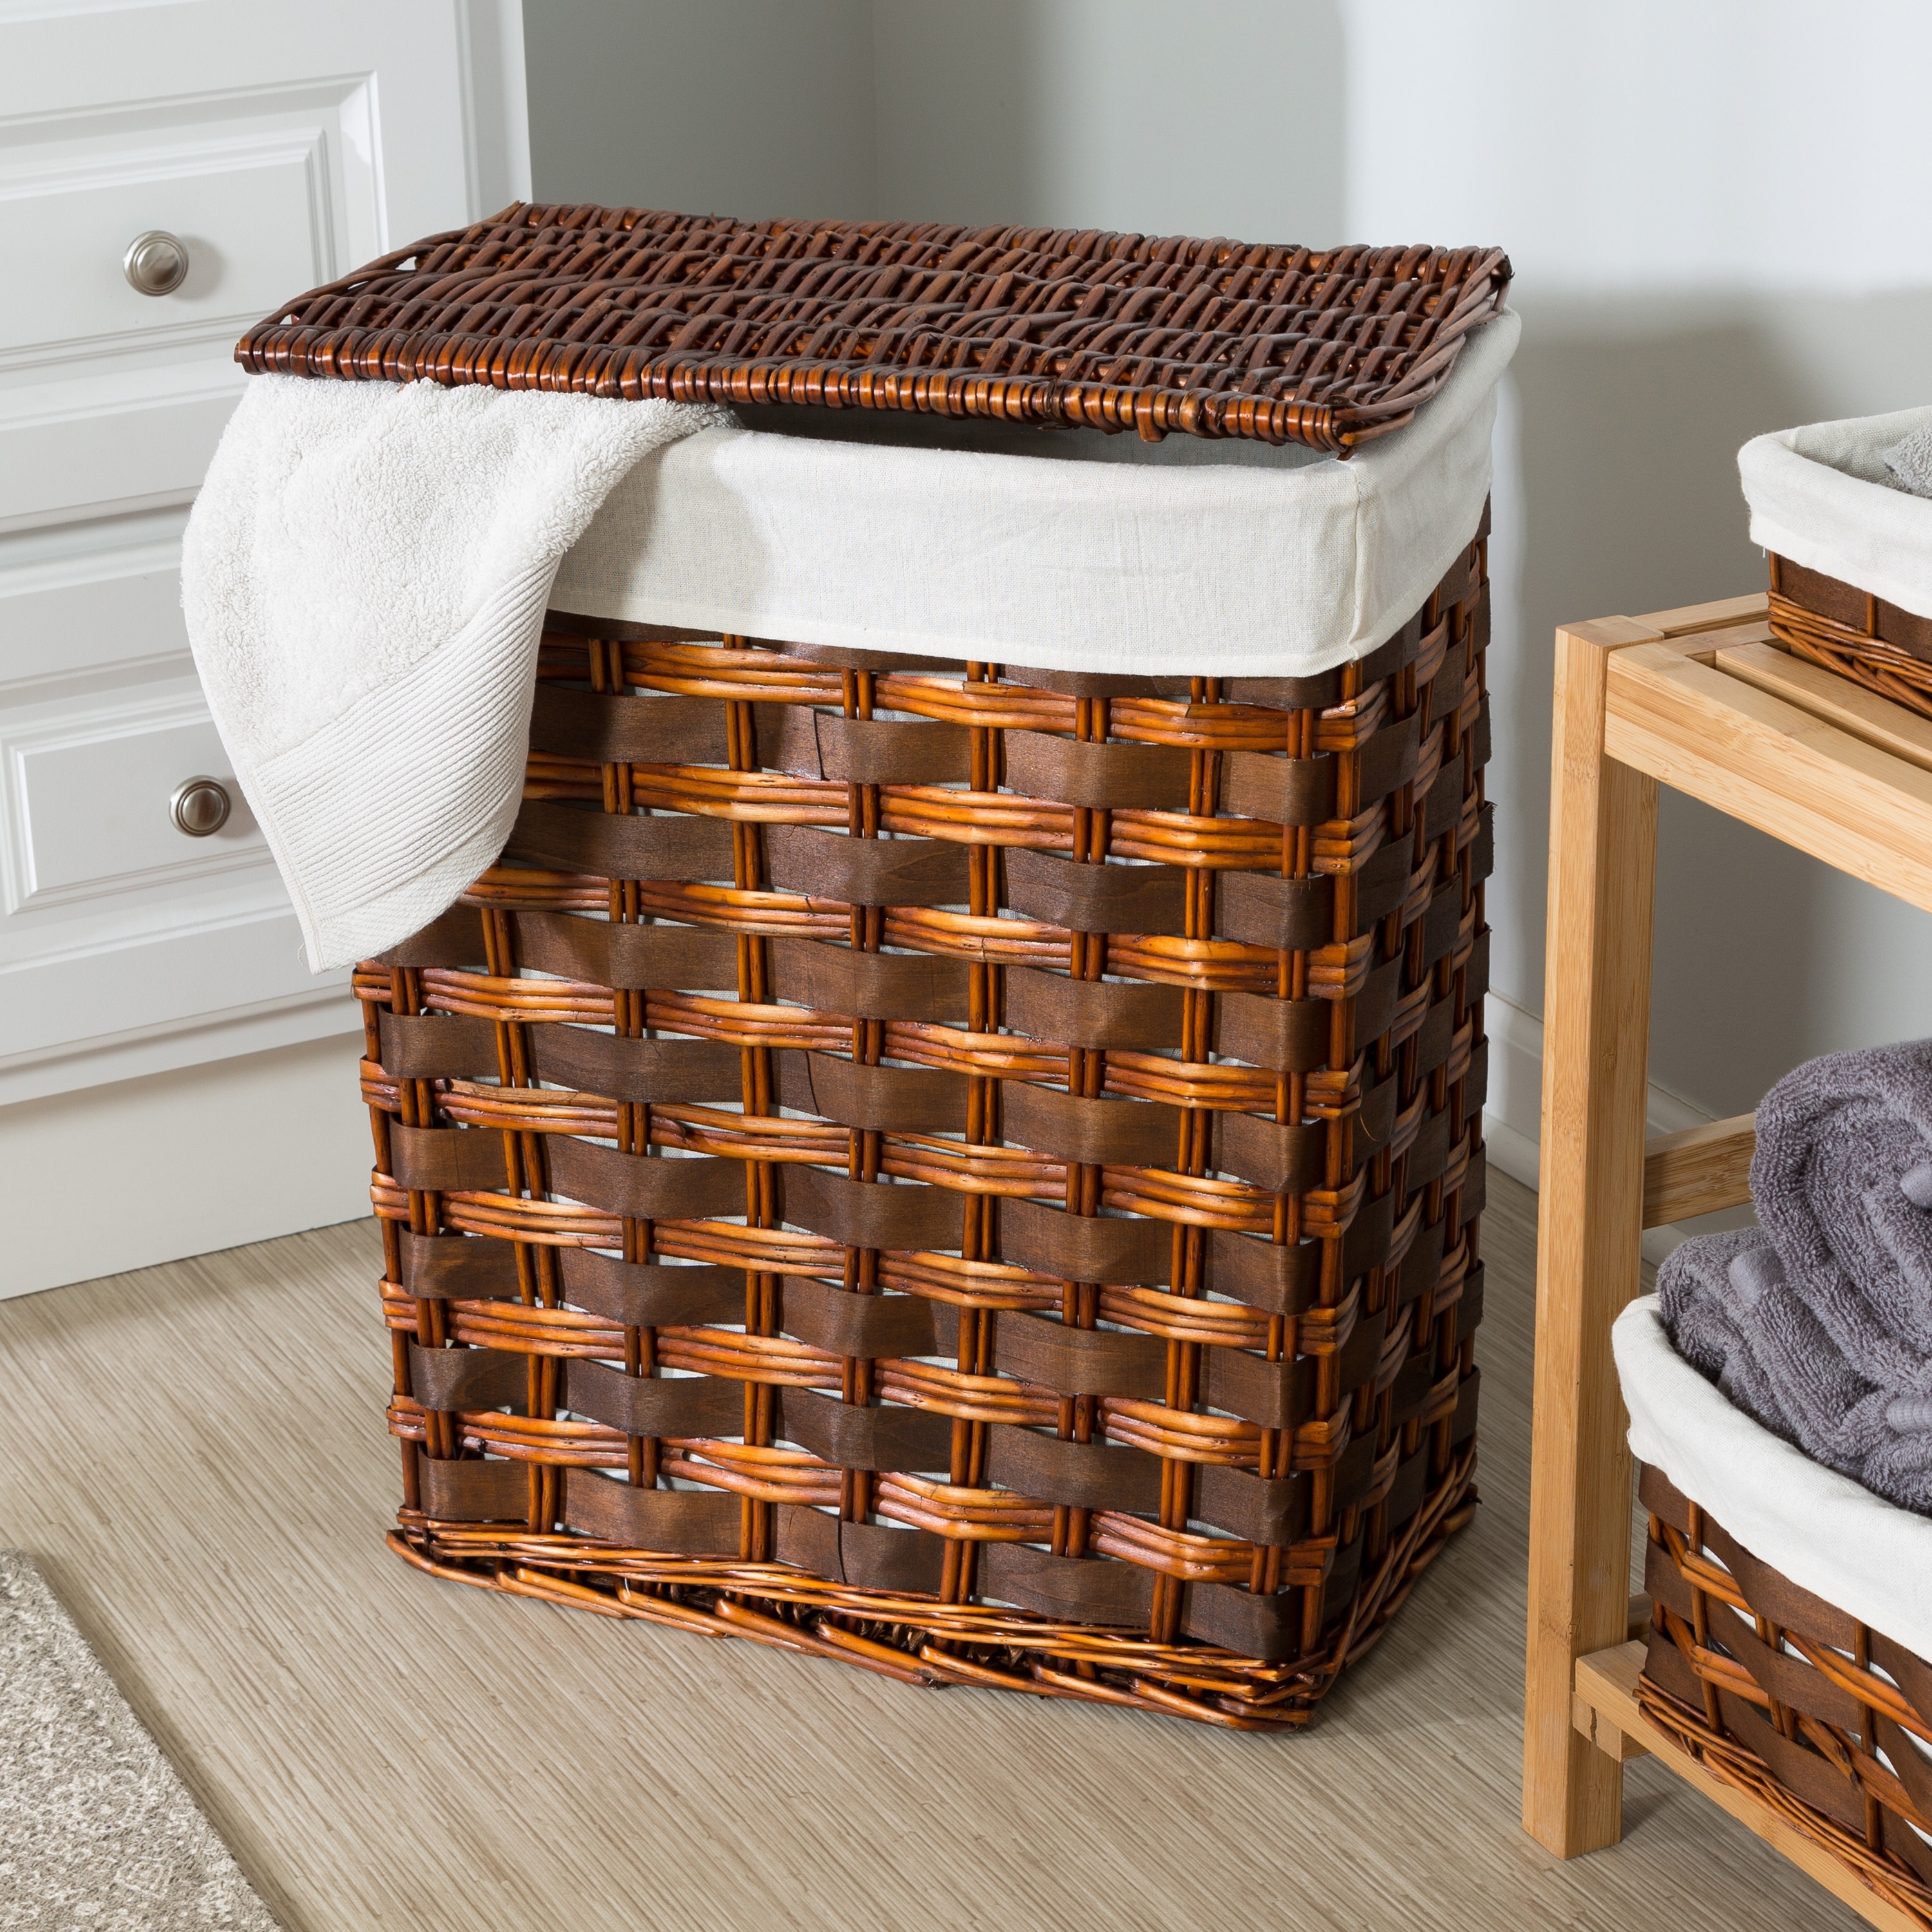 https://ak1.ostkcdn.com/images/products/is/images/direct/cb13367e1ab4325aeaf7474601f6737d1dfc63ee/Honey-Can-Do-7-Piece-Wicker-Hamper-and-Bath-Set.jpg